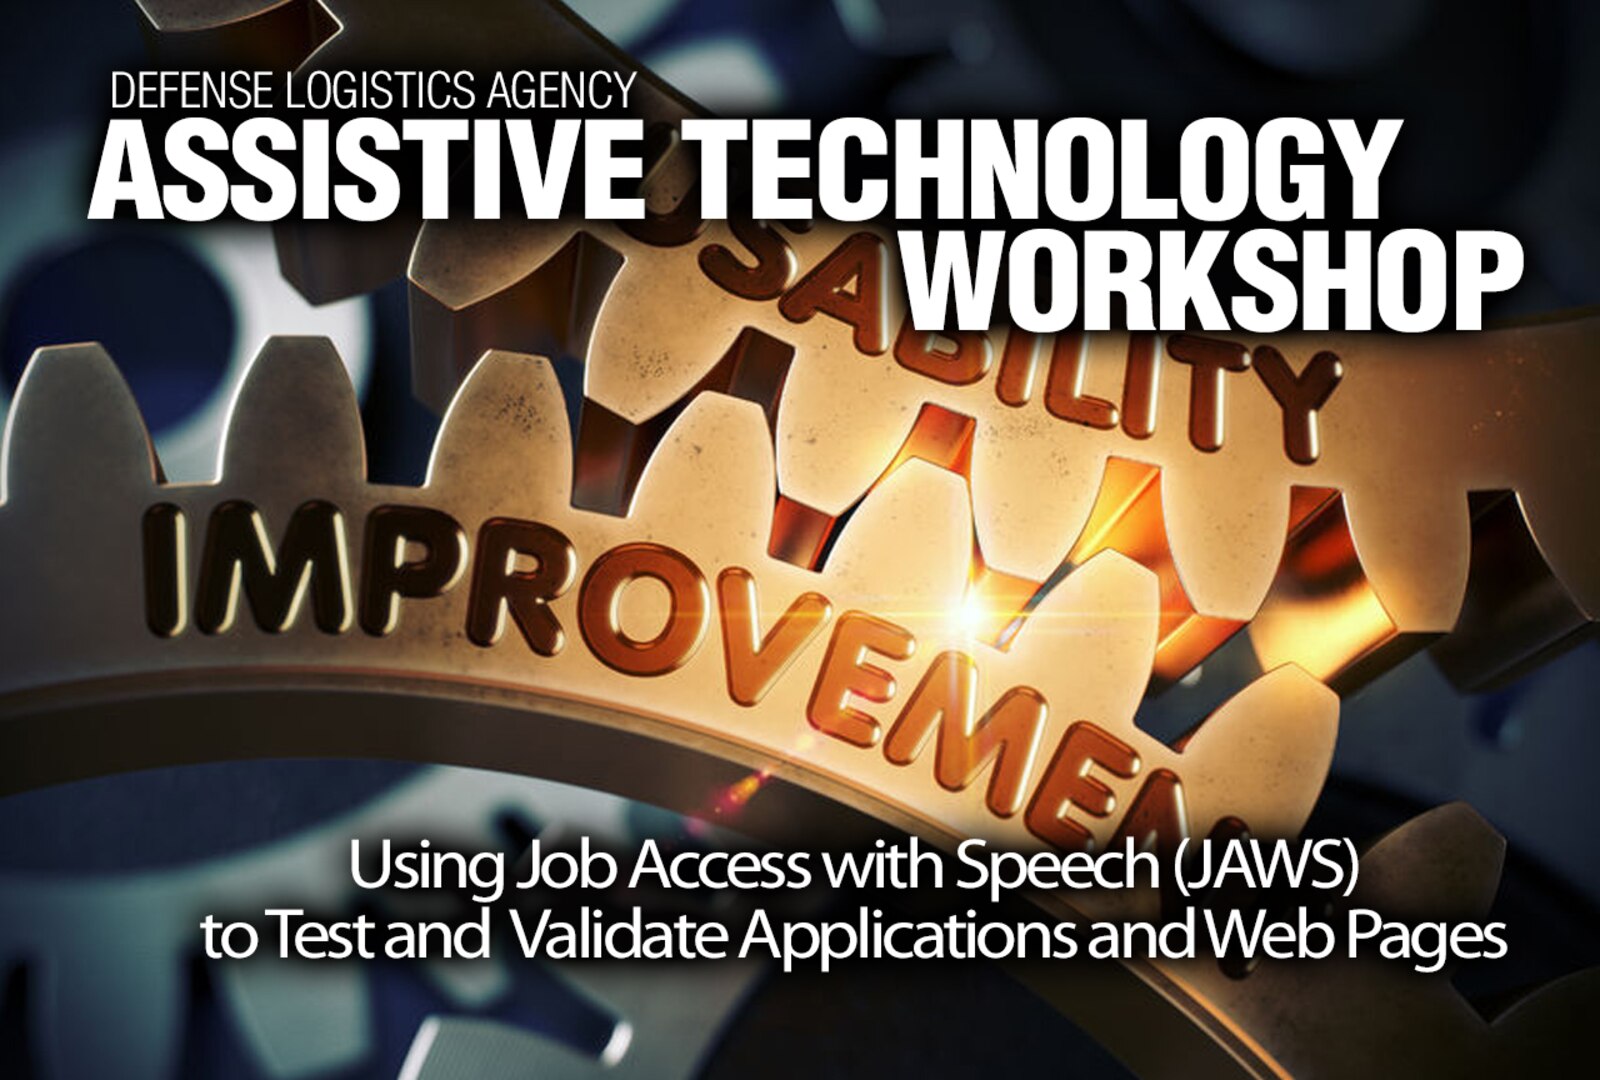 The June workshop, first in a planned series, taught participants to use JAWS software to ensure web pages are accessible.